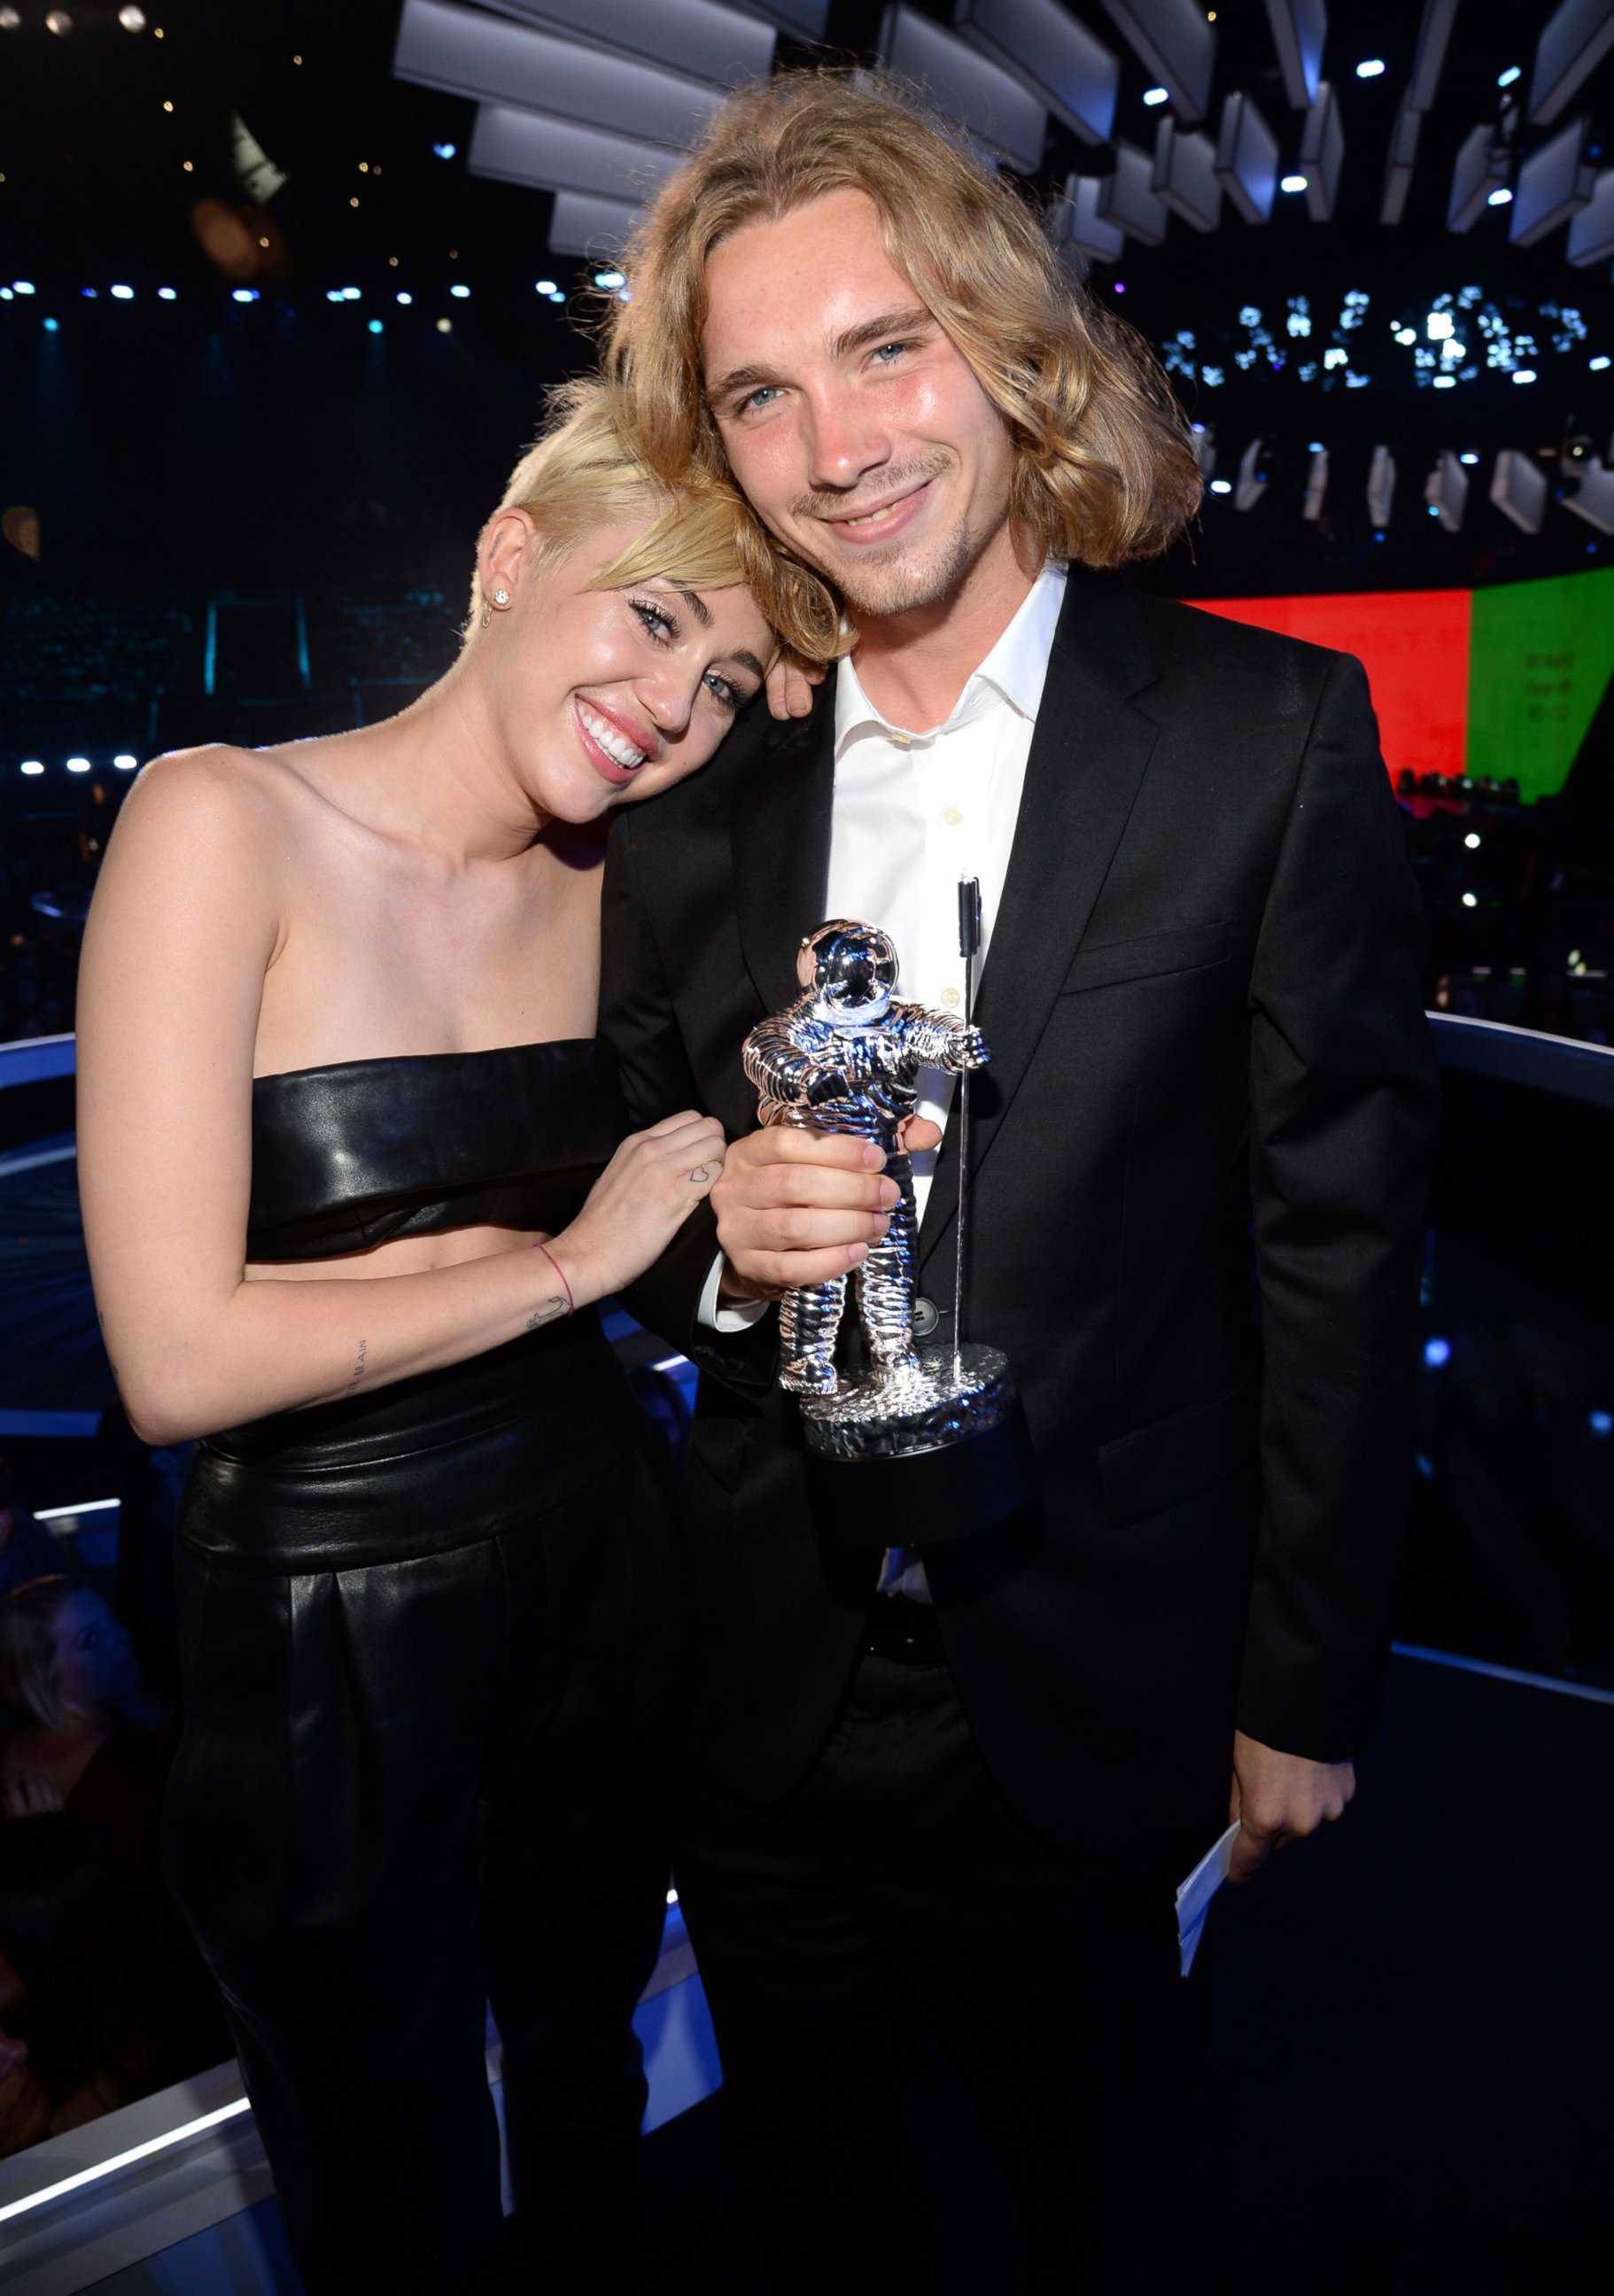 PHOTO: Miley Cyrus and Jesse attend the 2014 MTV Video Music Awards at The Forum, Aug. 24, 2014 in Inglewood, Calif.